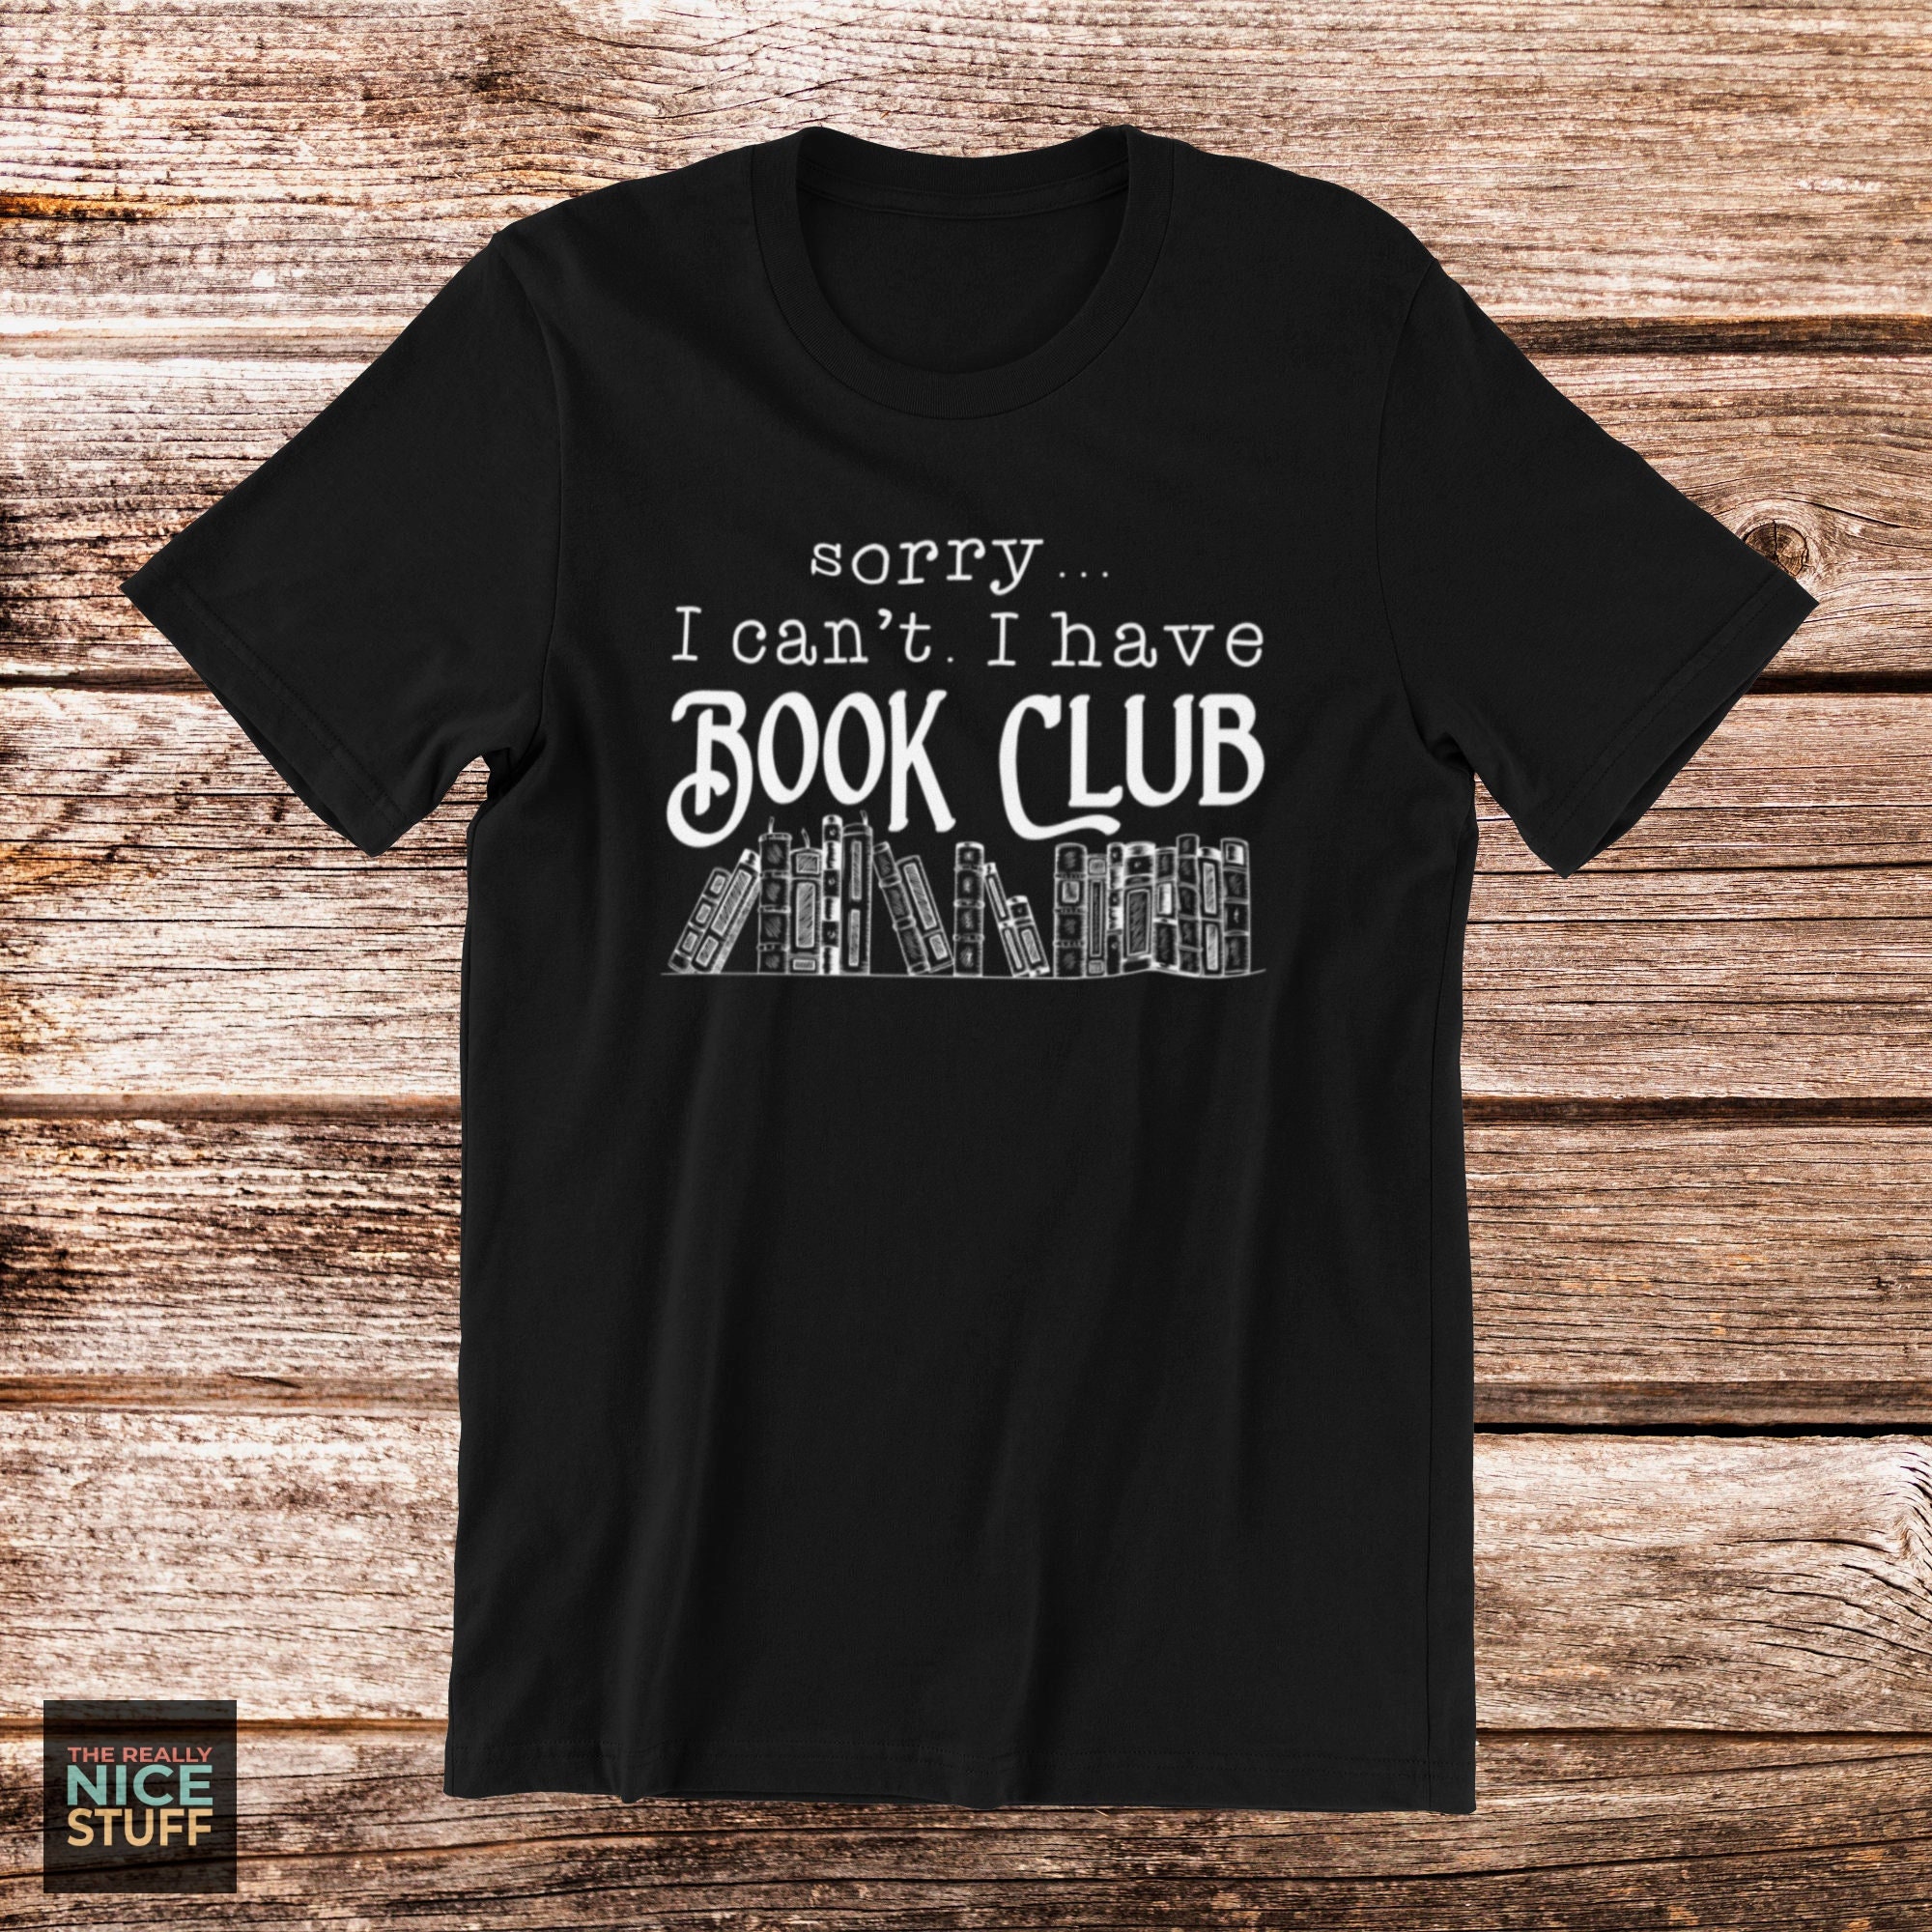 Book Club T-Shirt | Book Lover Shirt, Sorry I Can't I Have Book Club, Reading Shirt, Bookworm Gift, Librarian Shirt, Unisex